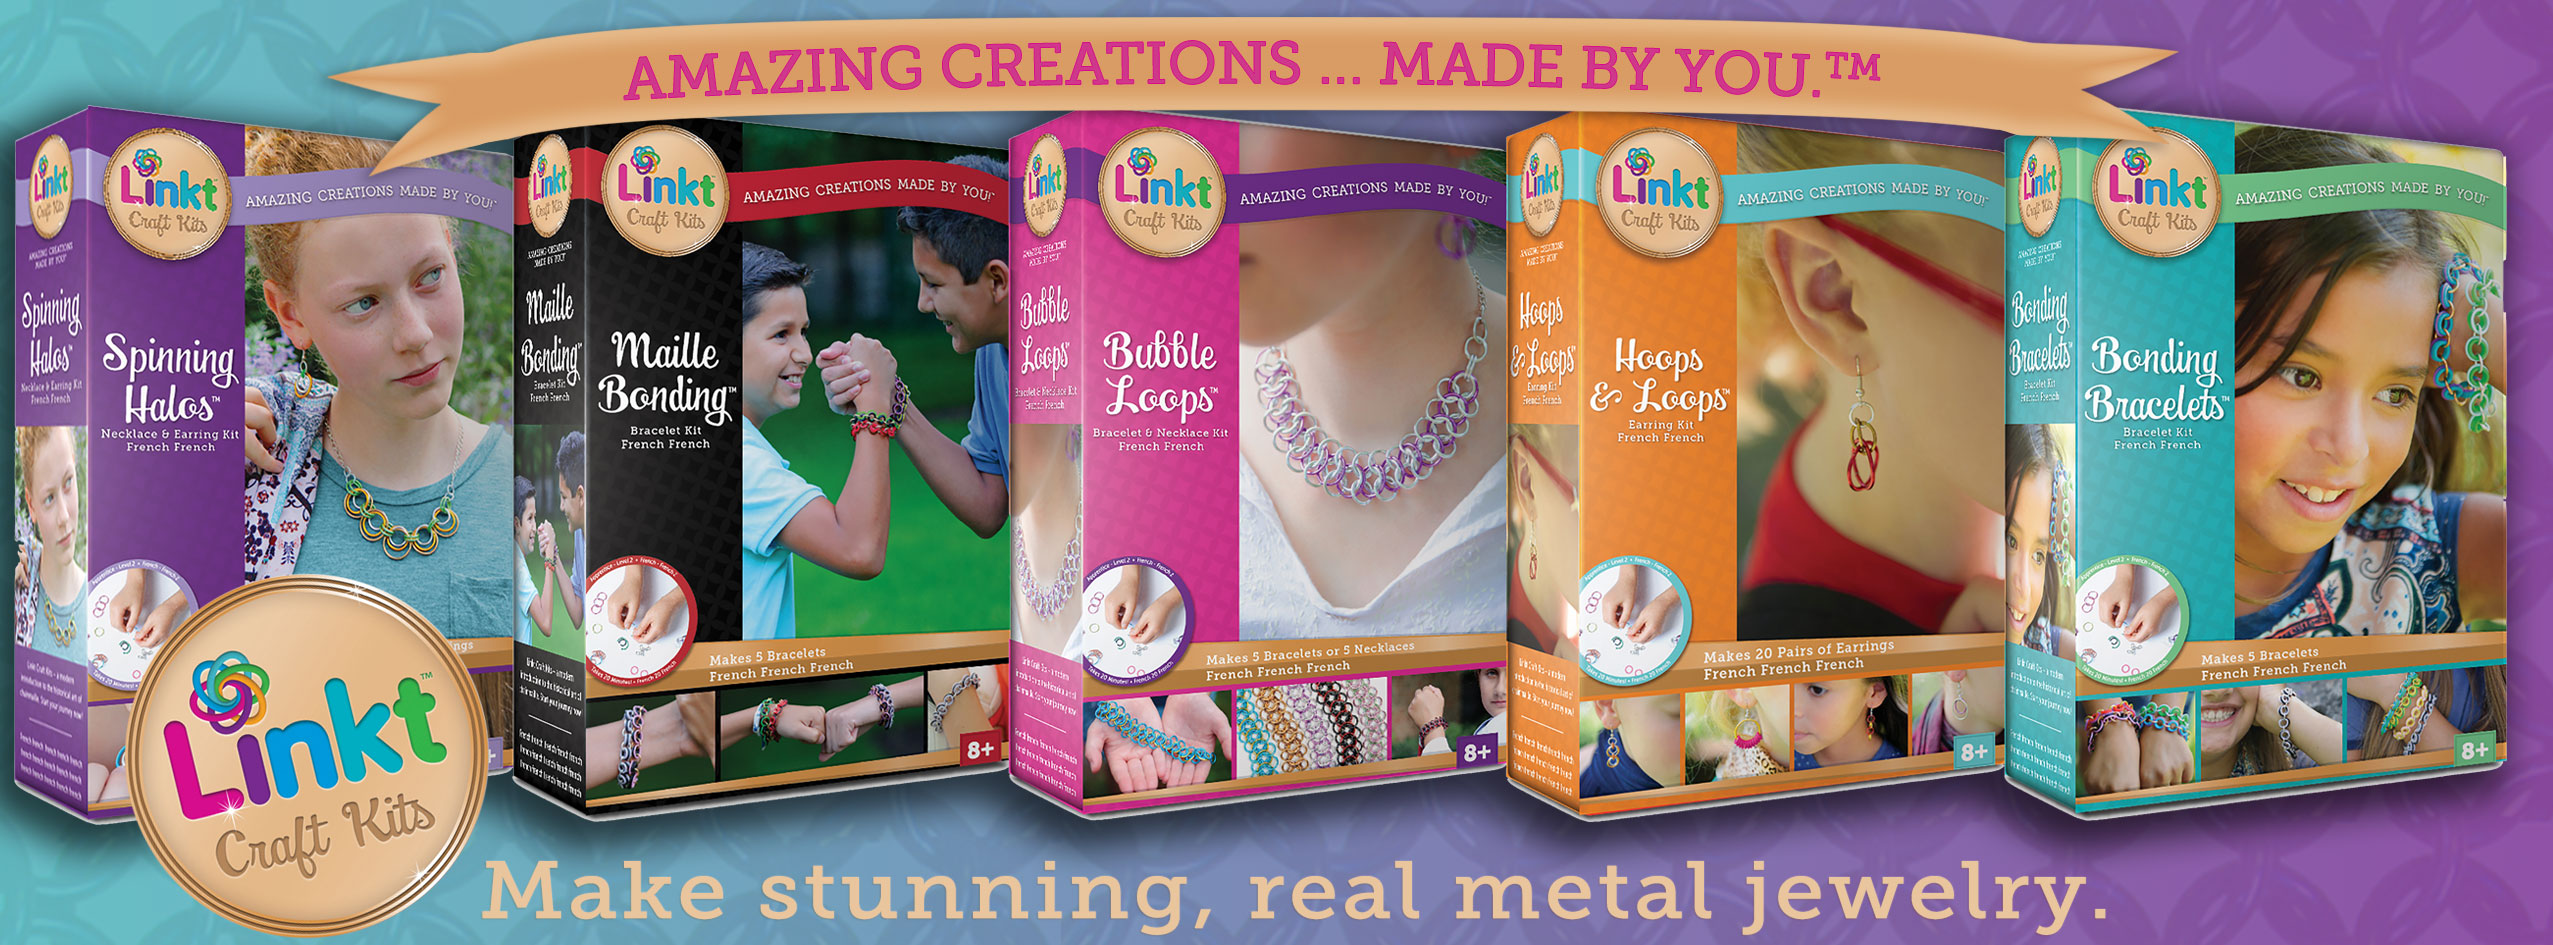 Linkt Craft Kits boxes